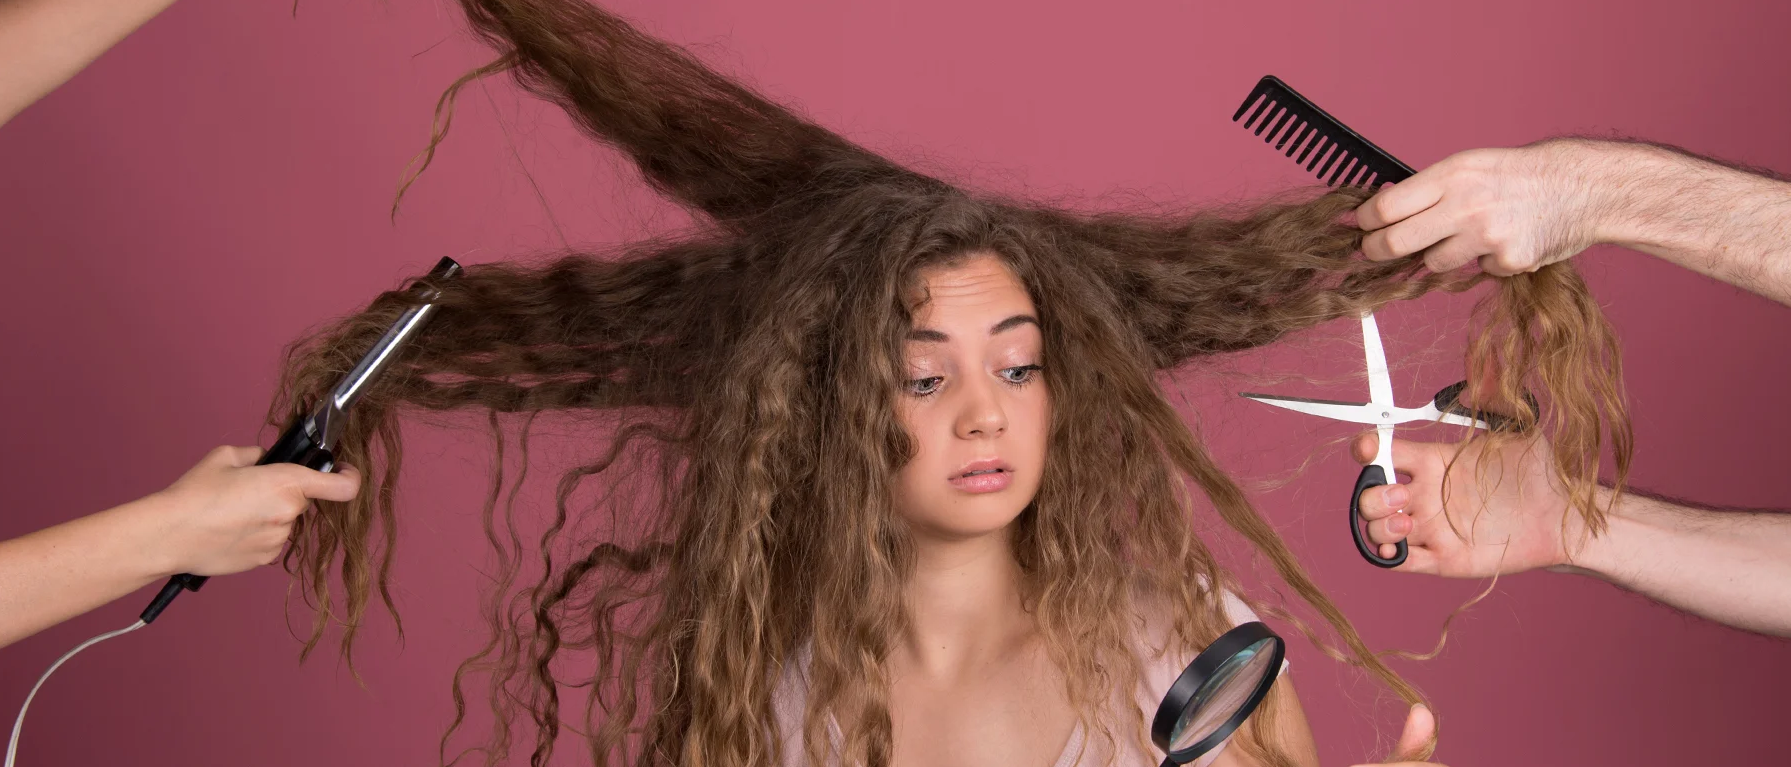 Damaged and Dull locks? Here are some fool-proof ways to revive your damaged tresses!